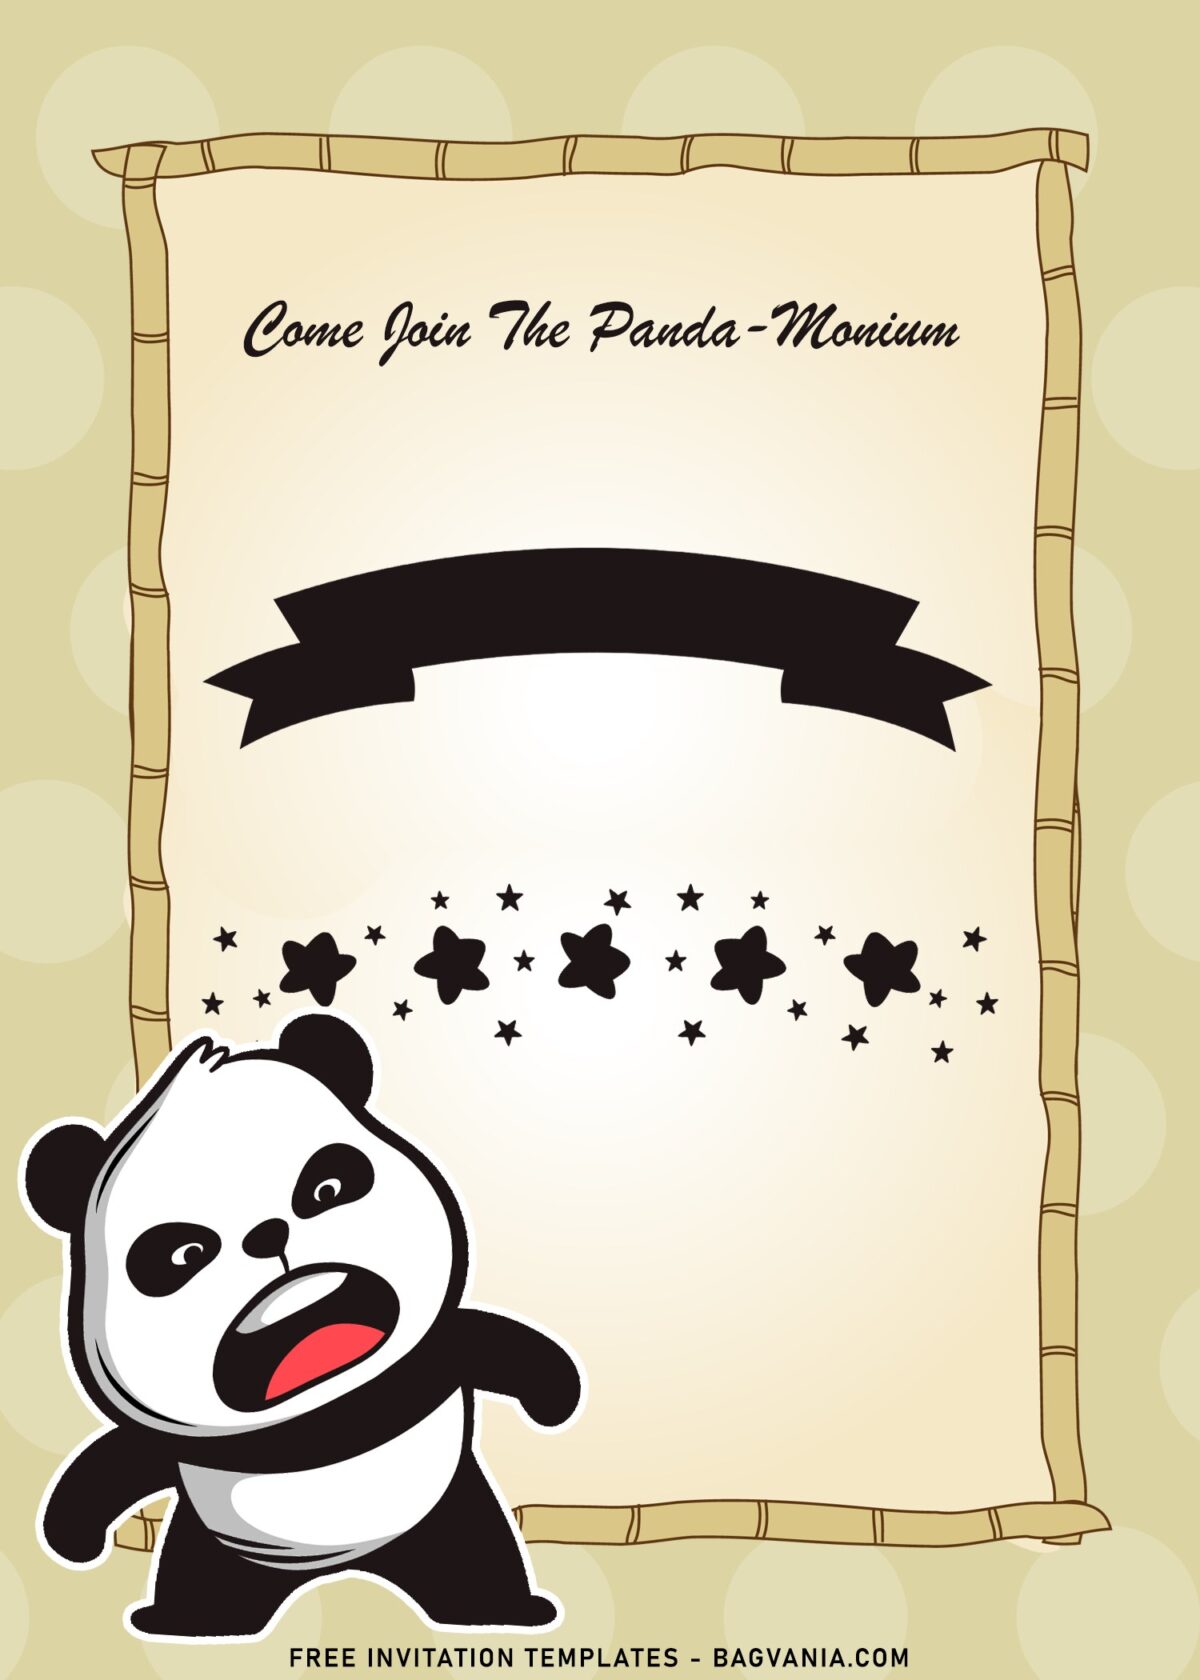 9+ Funny Panda Birthday Invitation Templates For Your Kid's Birthday with cute angry shouting baby panda